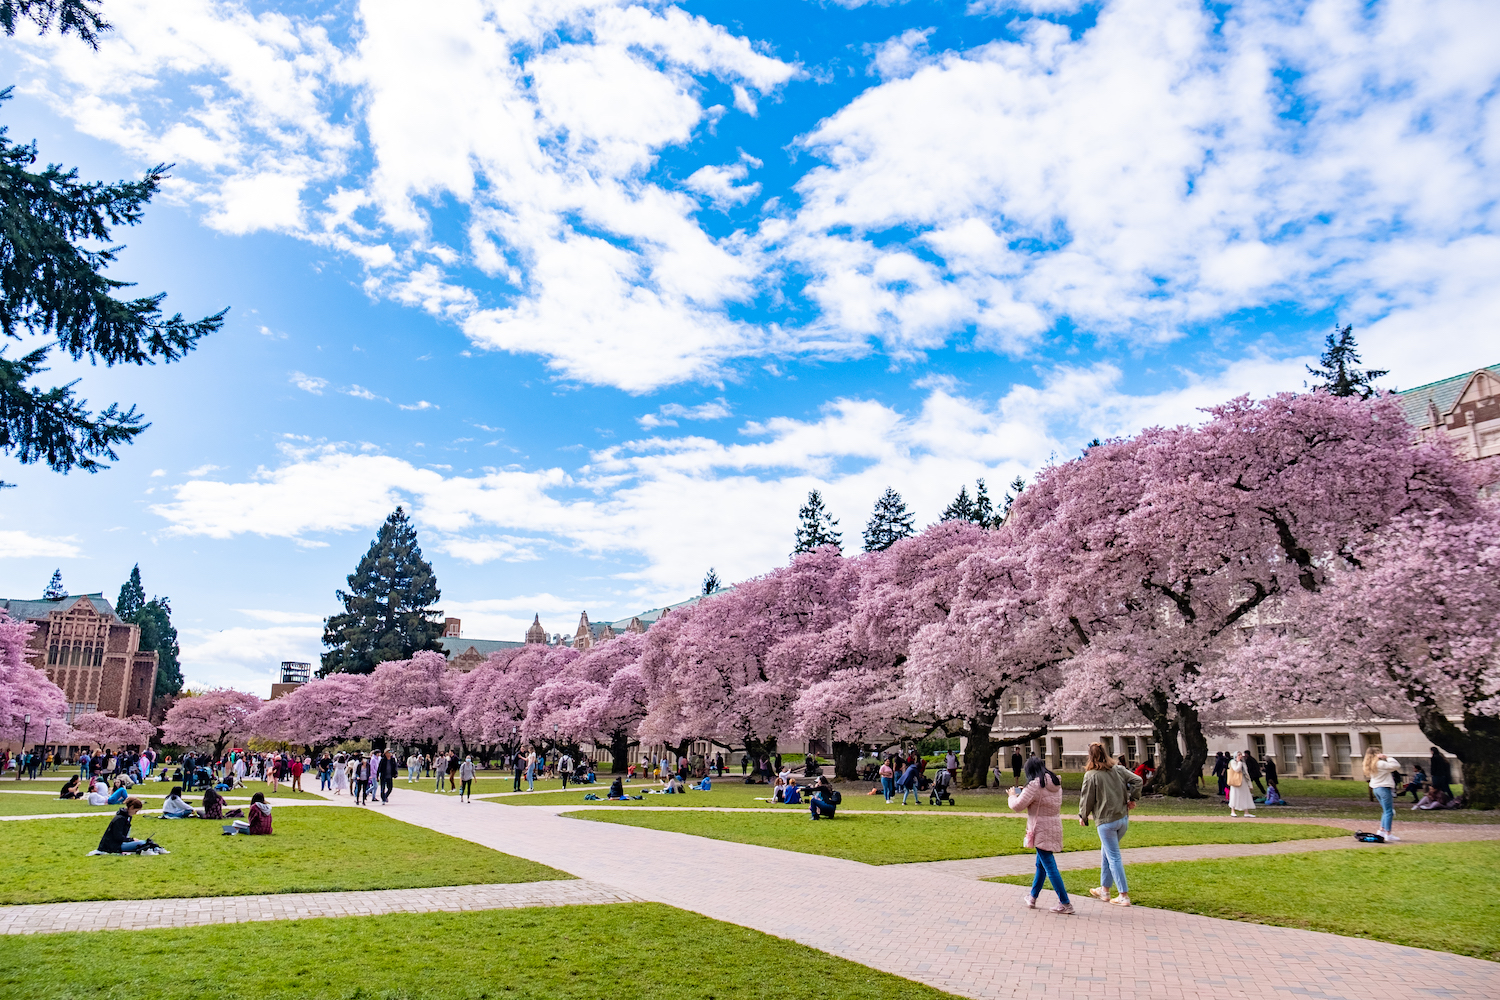 University of Washington Quad with cherry blossom trees all in bloom